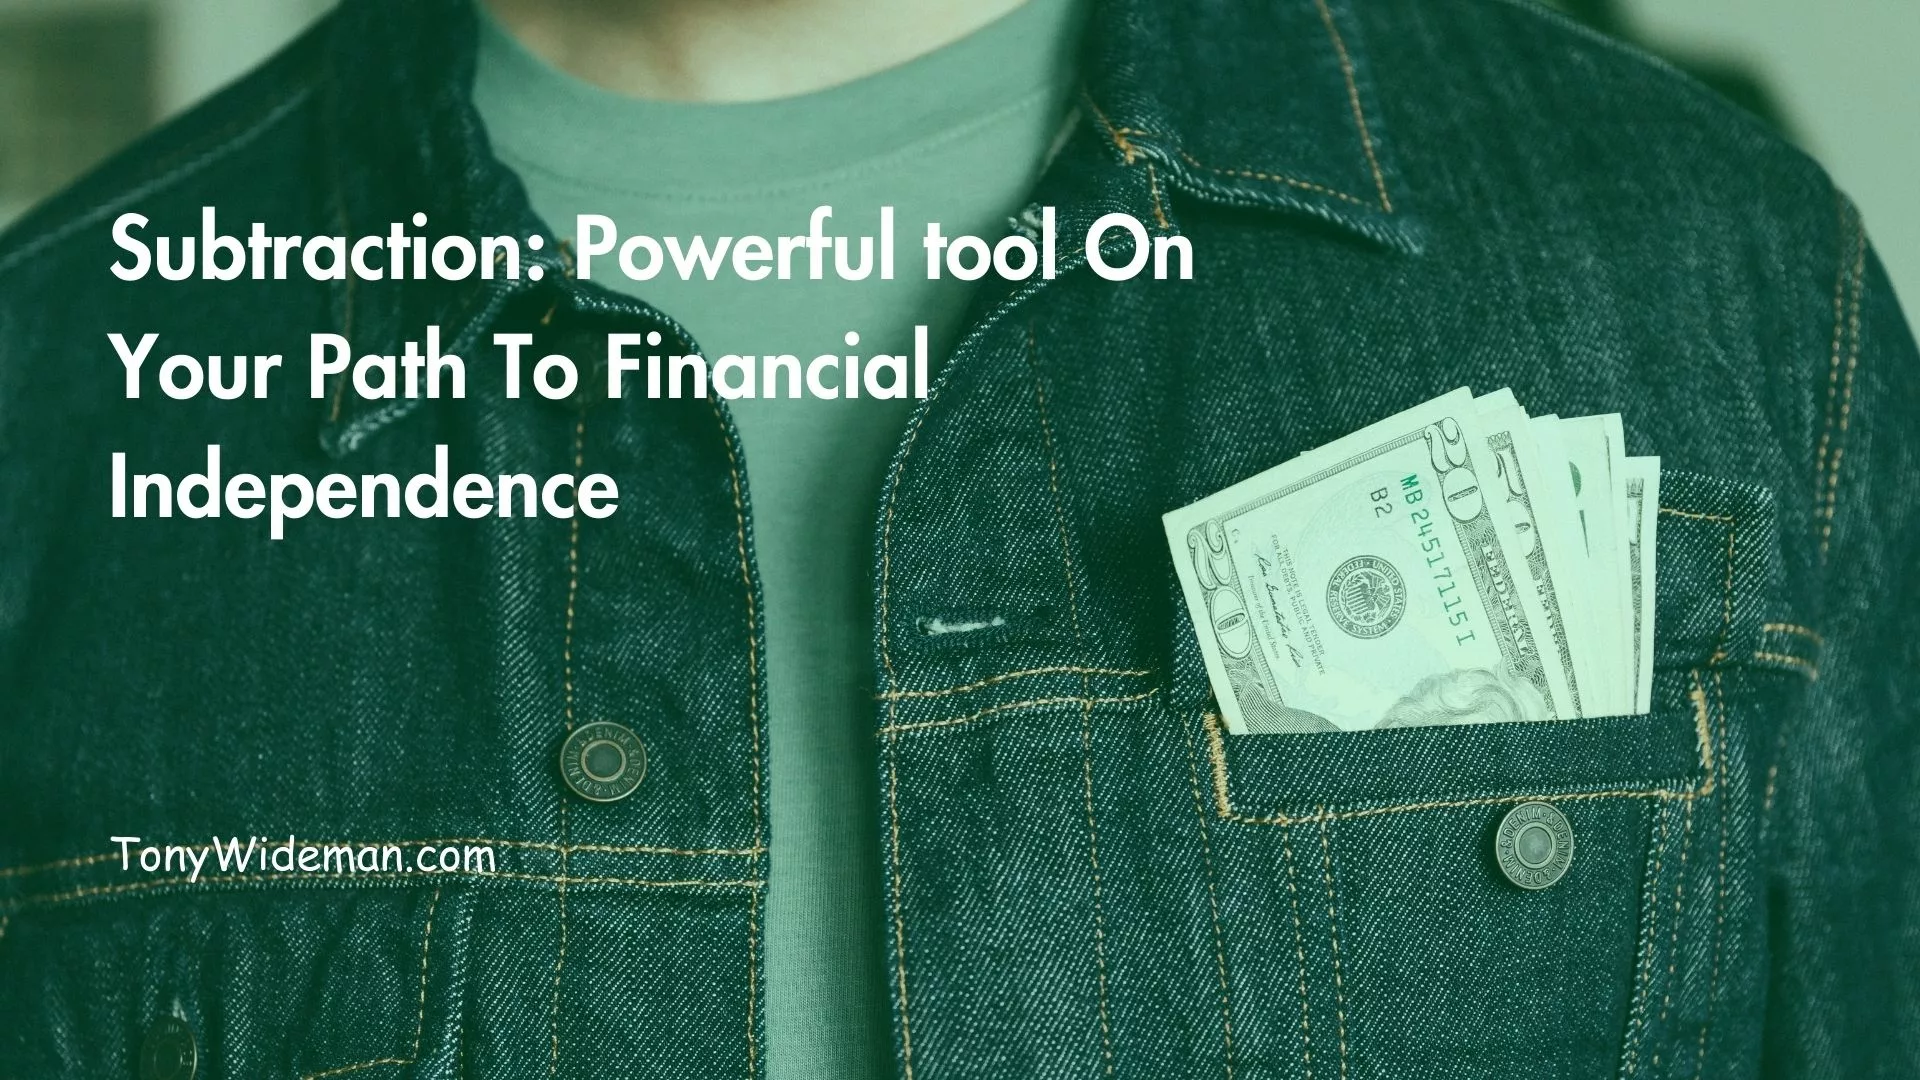 Subtraction: Powerful tool On Your Path To Financial Independence